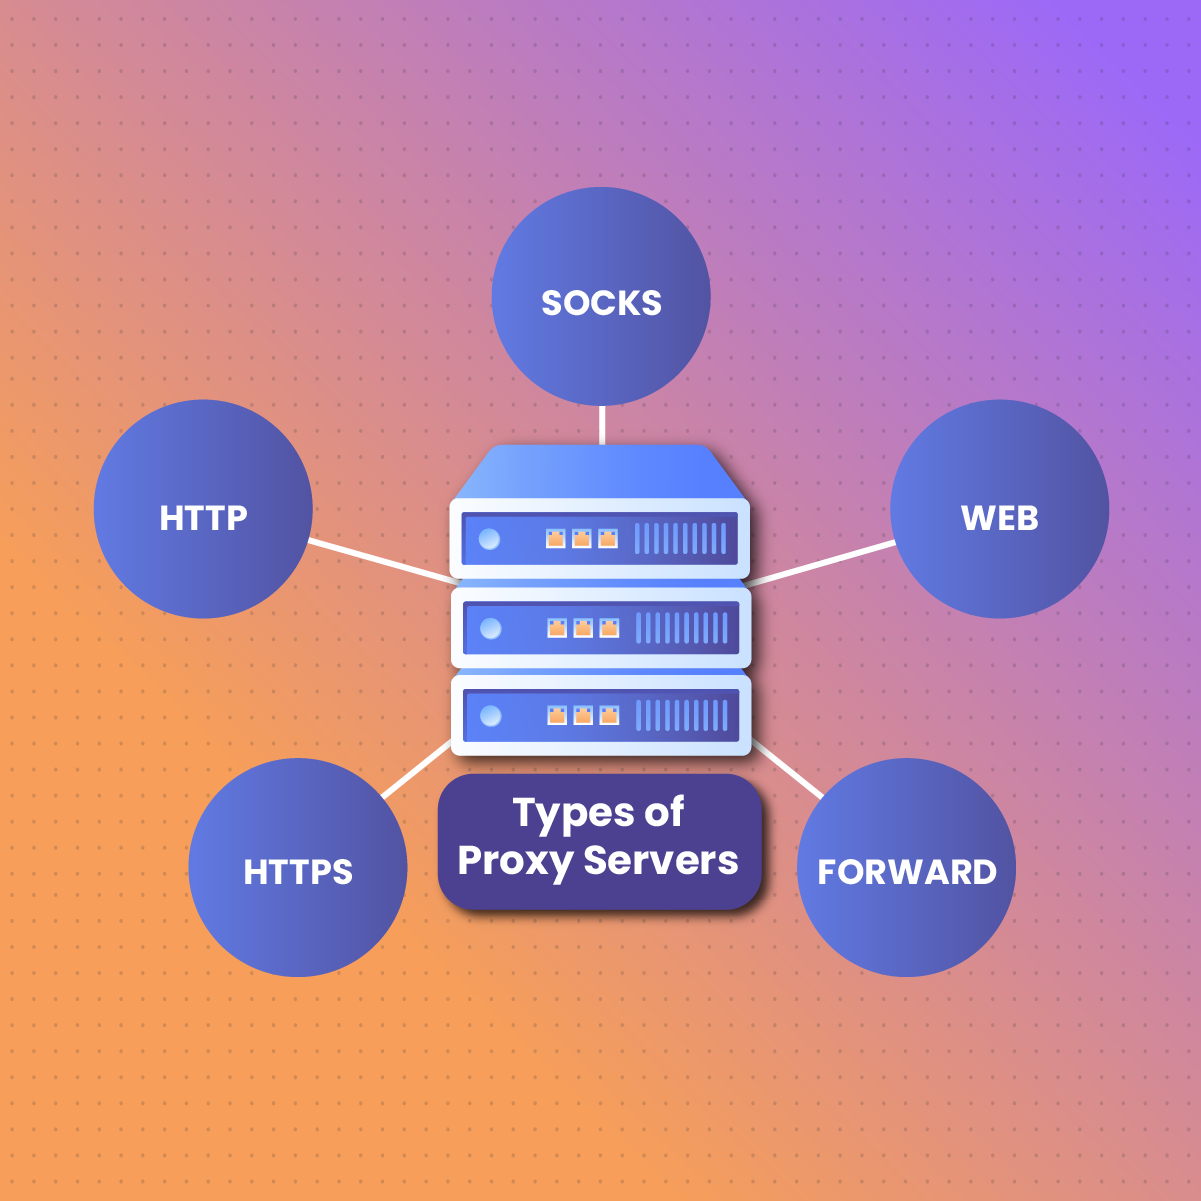 types of proxy swervers